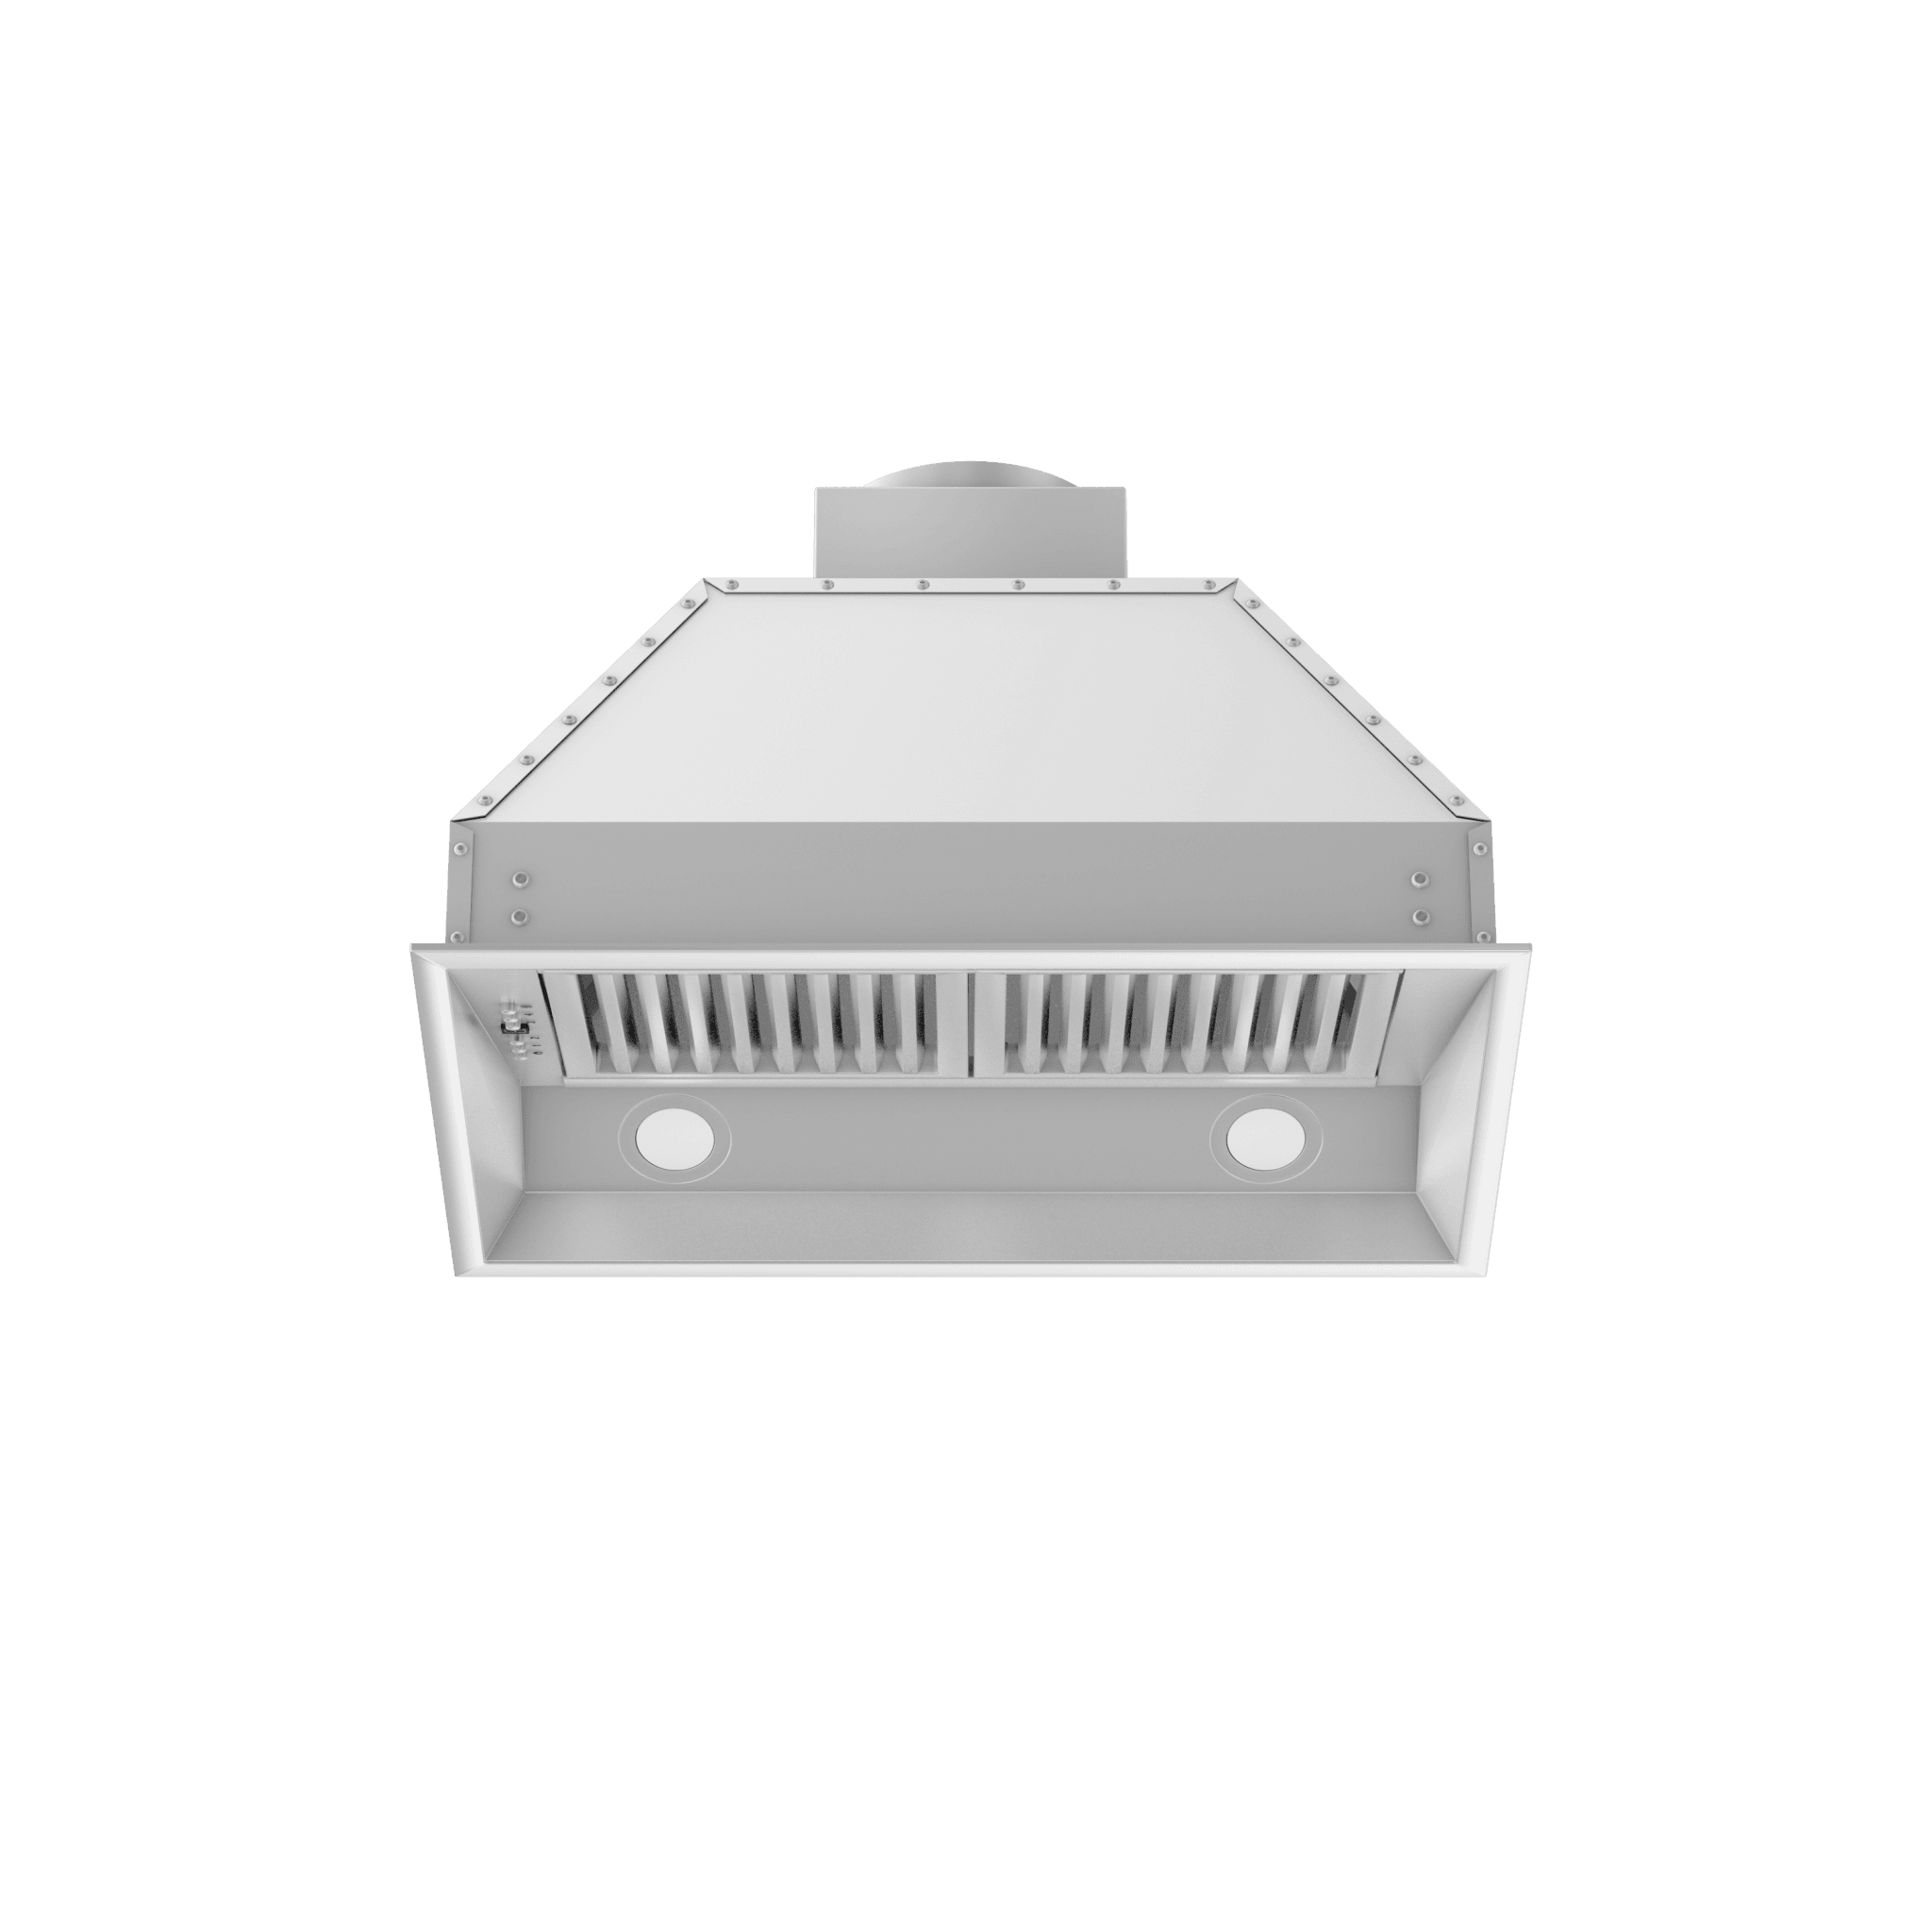 ZLINE 40" Ducted Wall Mount Range Hood Insert in Outdoor Approved Stainless Steel (698-304-40)